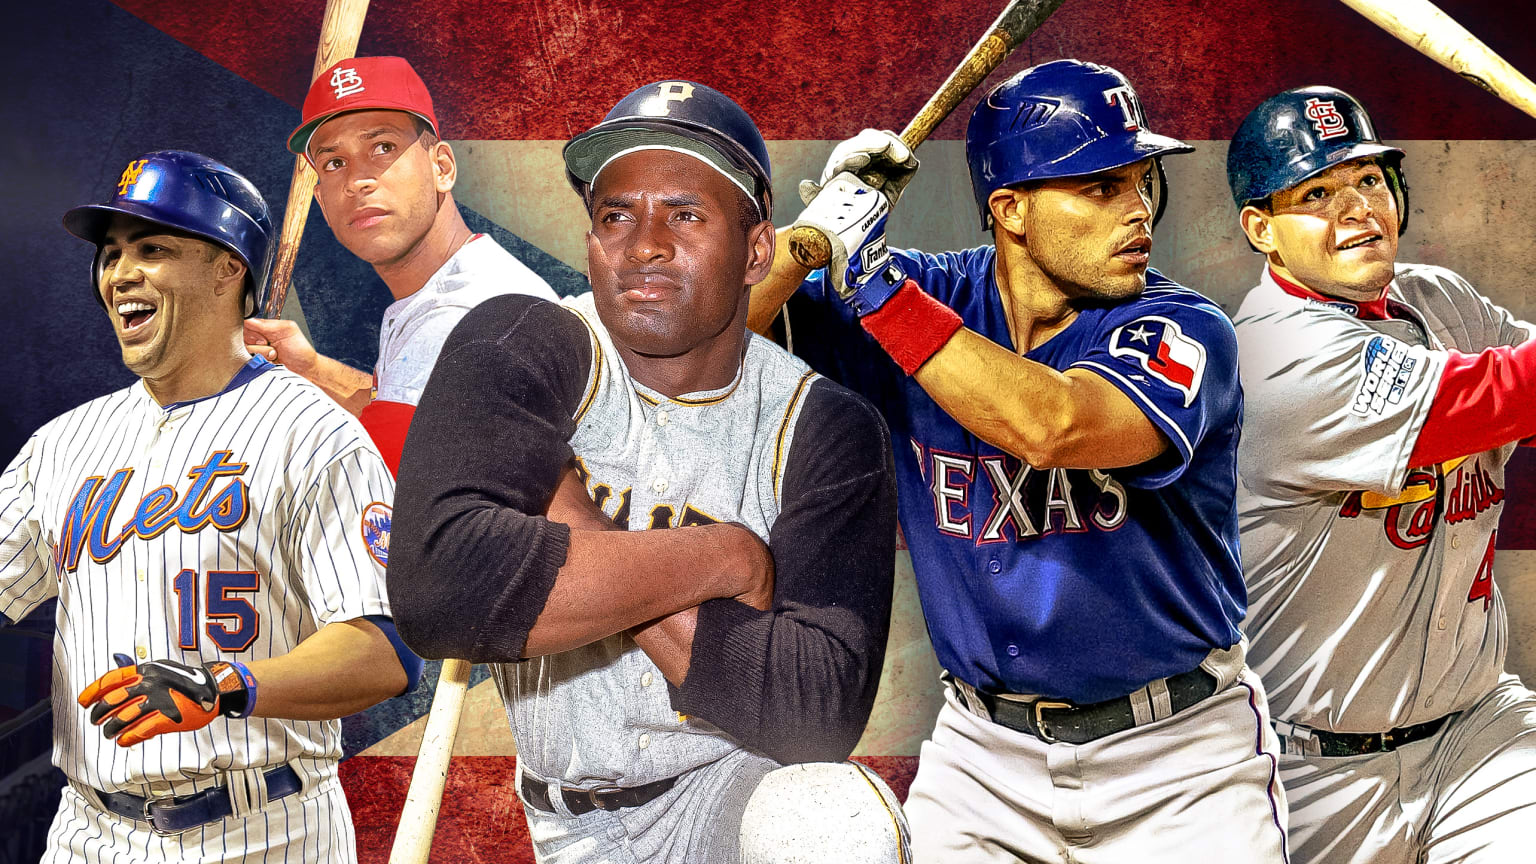 The Puerto Rican flag serves as a backdrop for cutout images of five players: Carlos Beltran, Orlando Cepeda, Roberto Clemente, Ivan Rodriguez and Yadier Molina